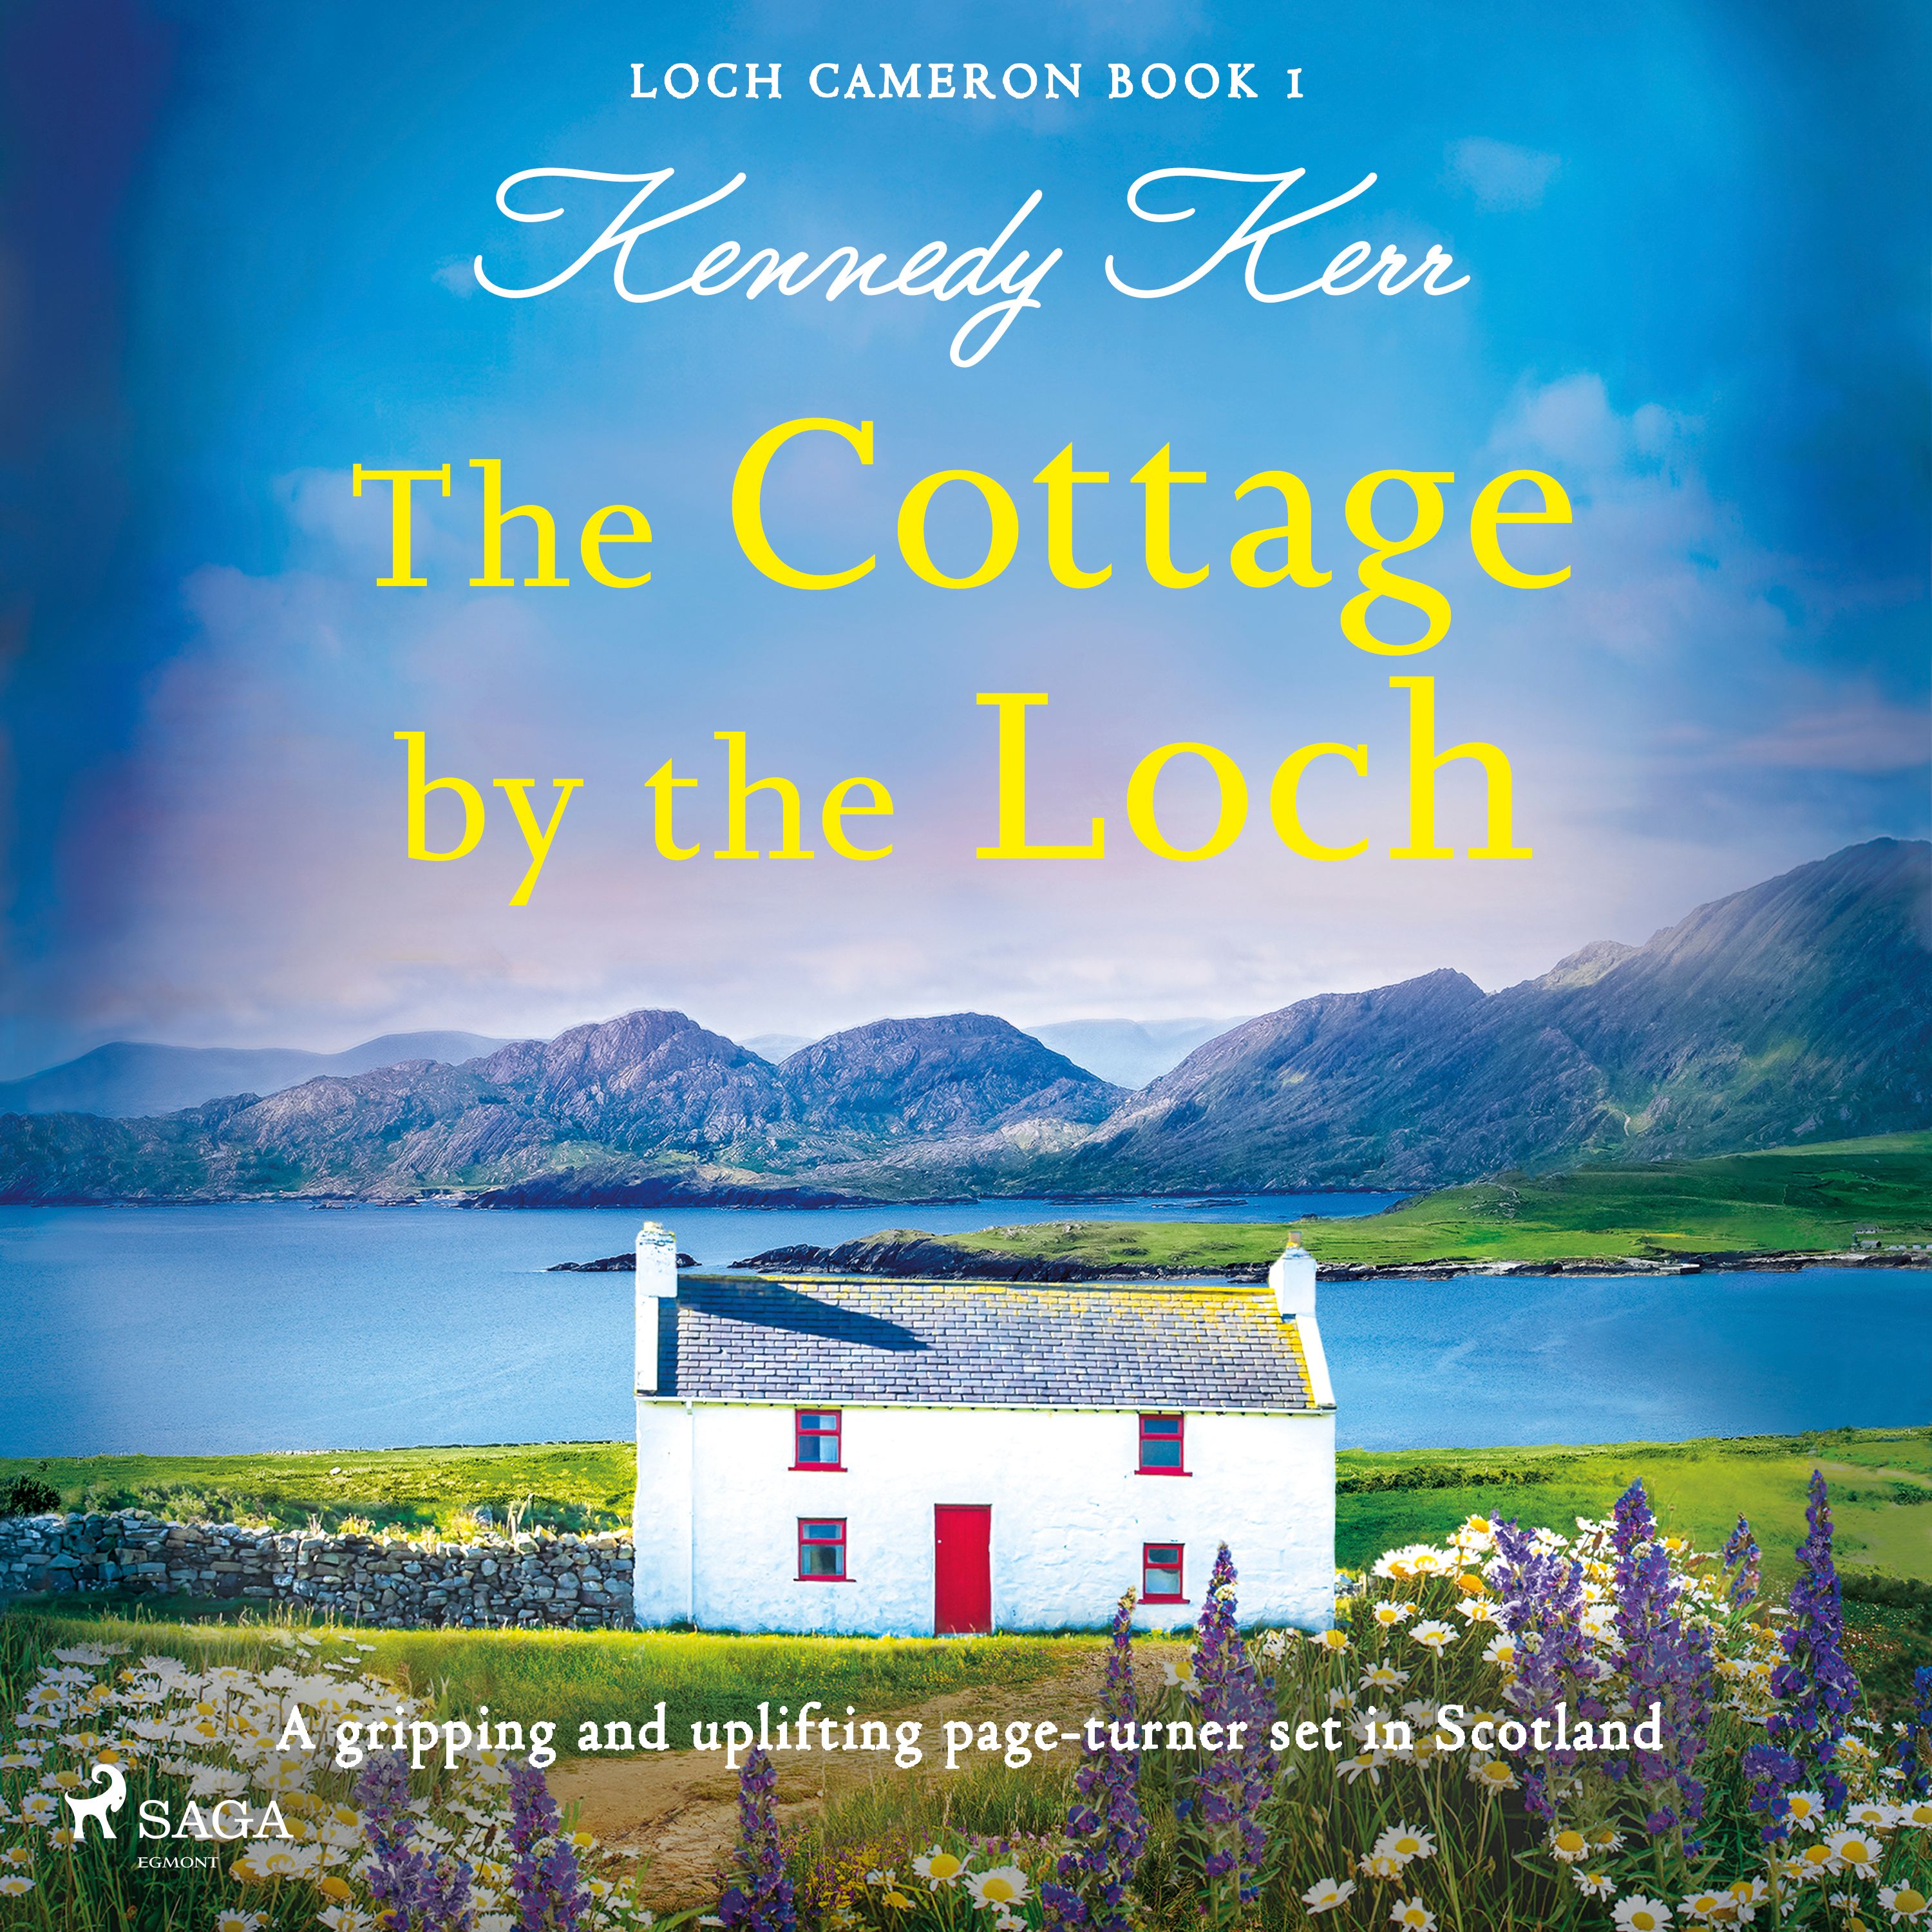 The Cottage by the Loch, audiobook by Kennedy Kerr